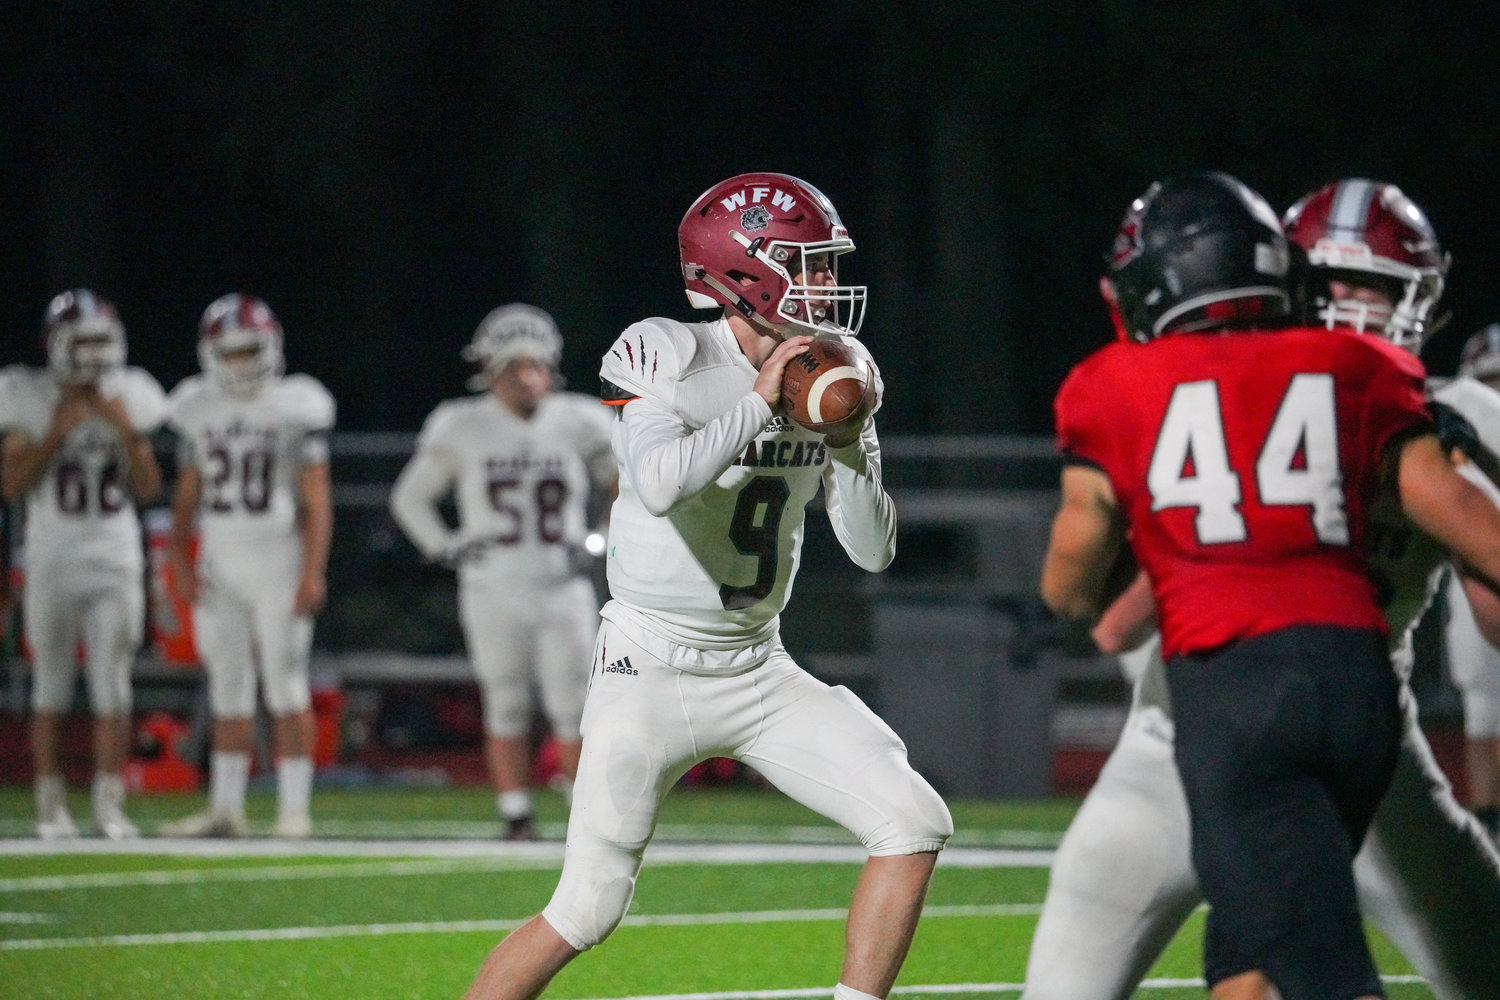 W.F. West junior signal-caller Gavin Fugate looks for an open receiver against Shelton on Oct. 1, 2021.